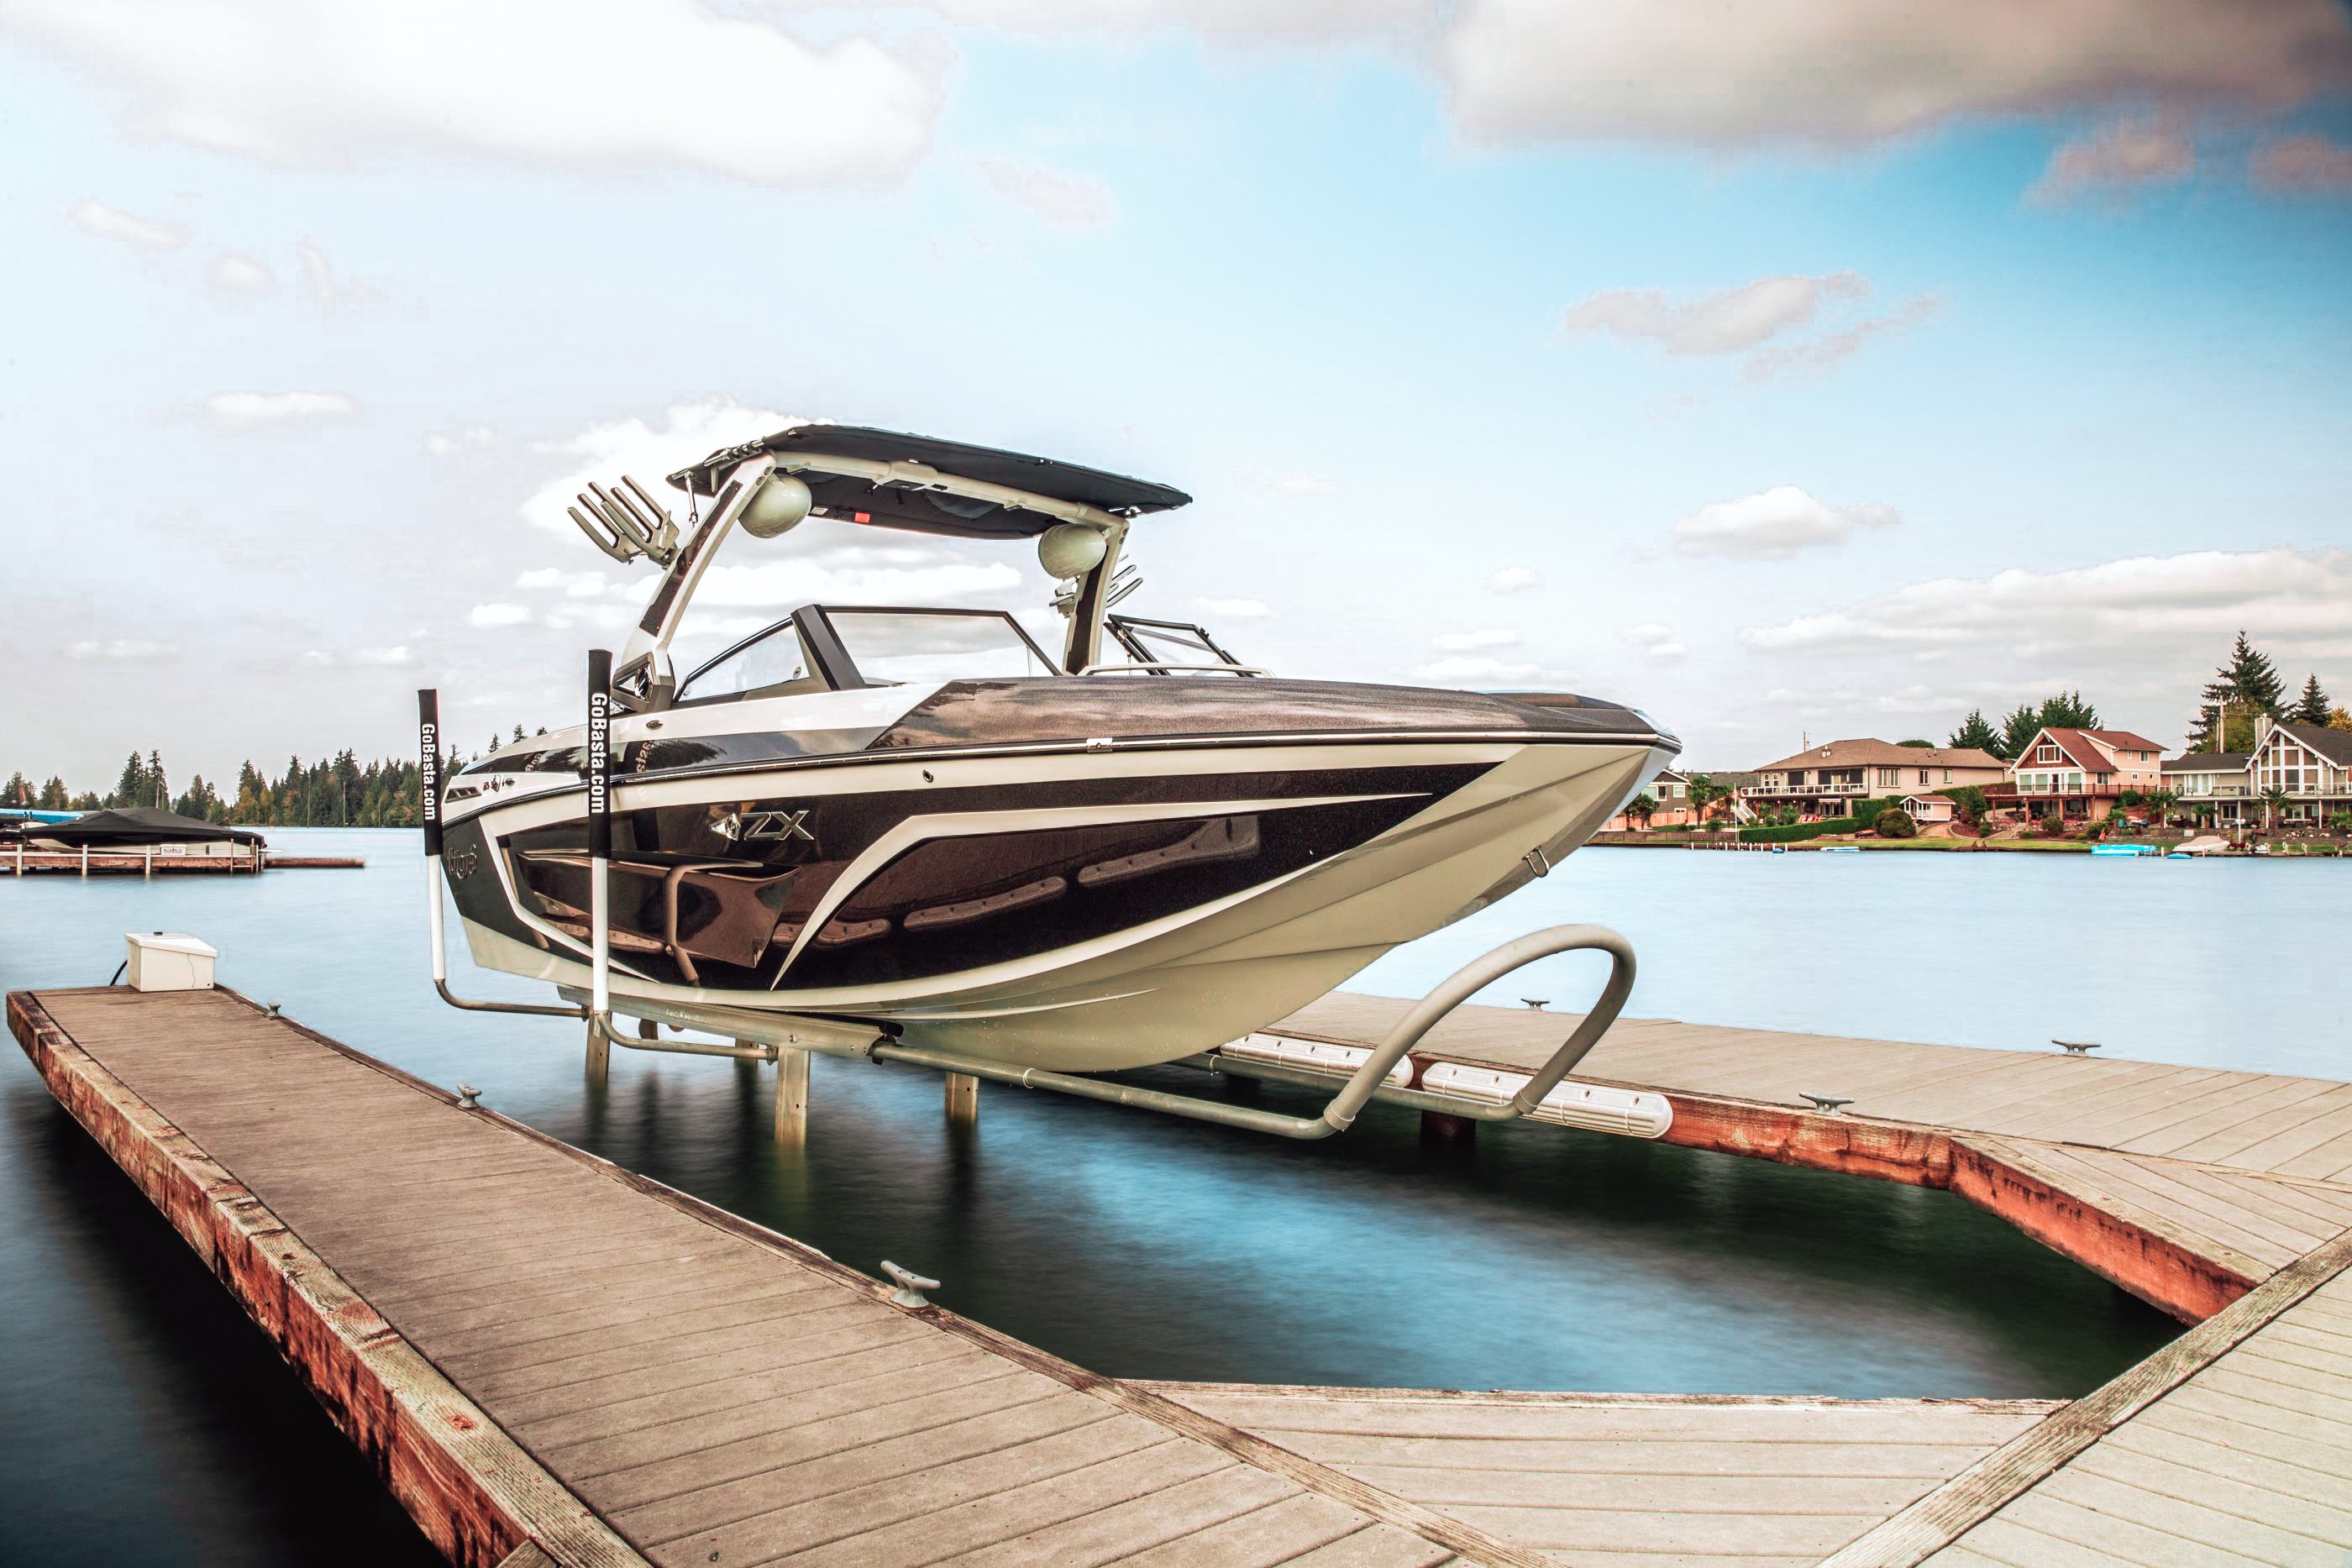 Basta Boatlifts designs and manufactures premium hydraulic boat lifts. The company invented the “Over-Center” gravity locking design, which is now the standard in the boat lift industry.